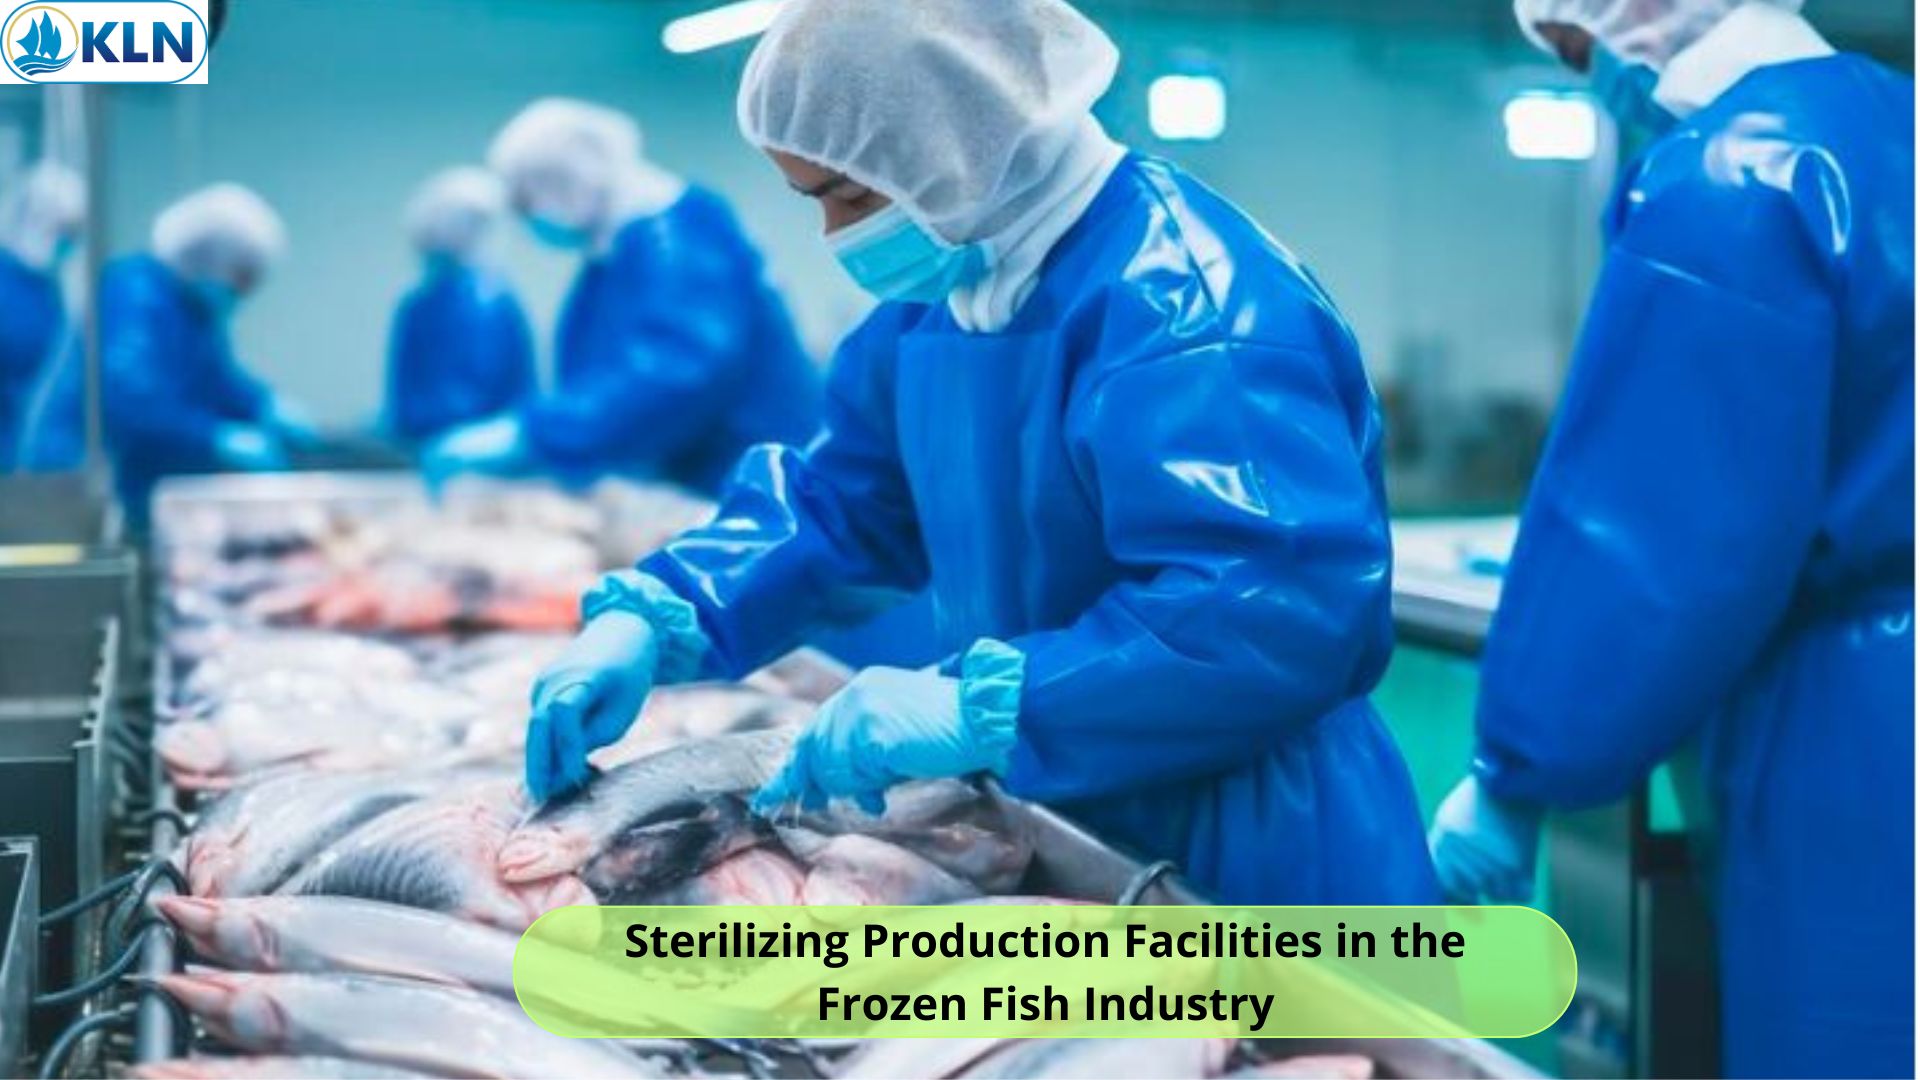 Sterilizing Production Facilities in the Frozen Fish Industry